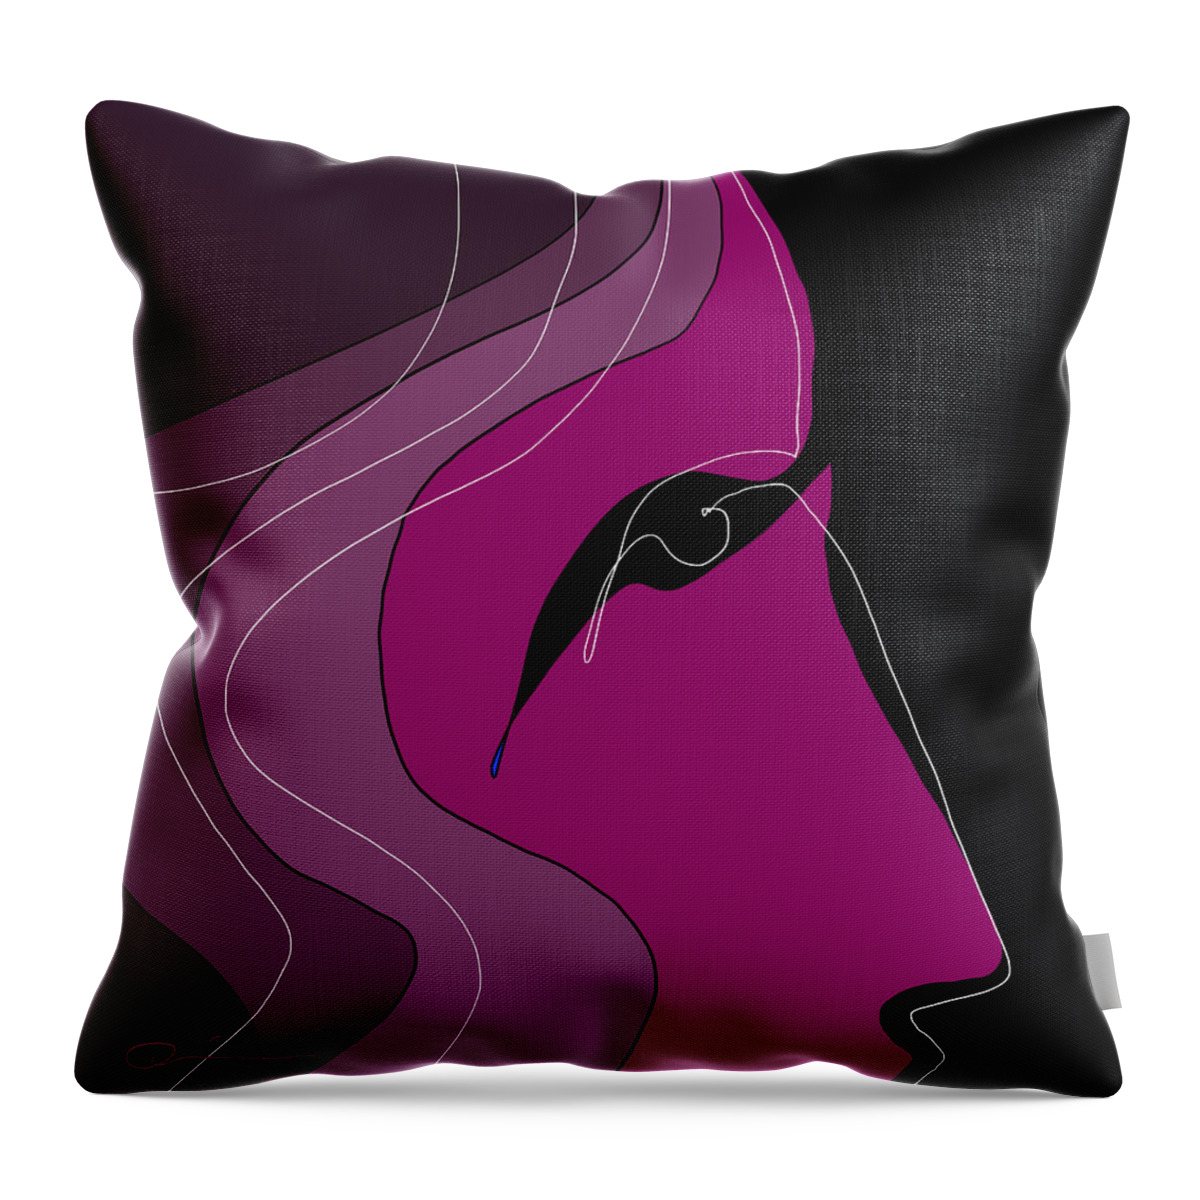 Quiros Throw Pillow featuring the digital art Cry 4 by Jeffrey Quiros